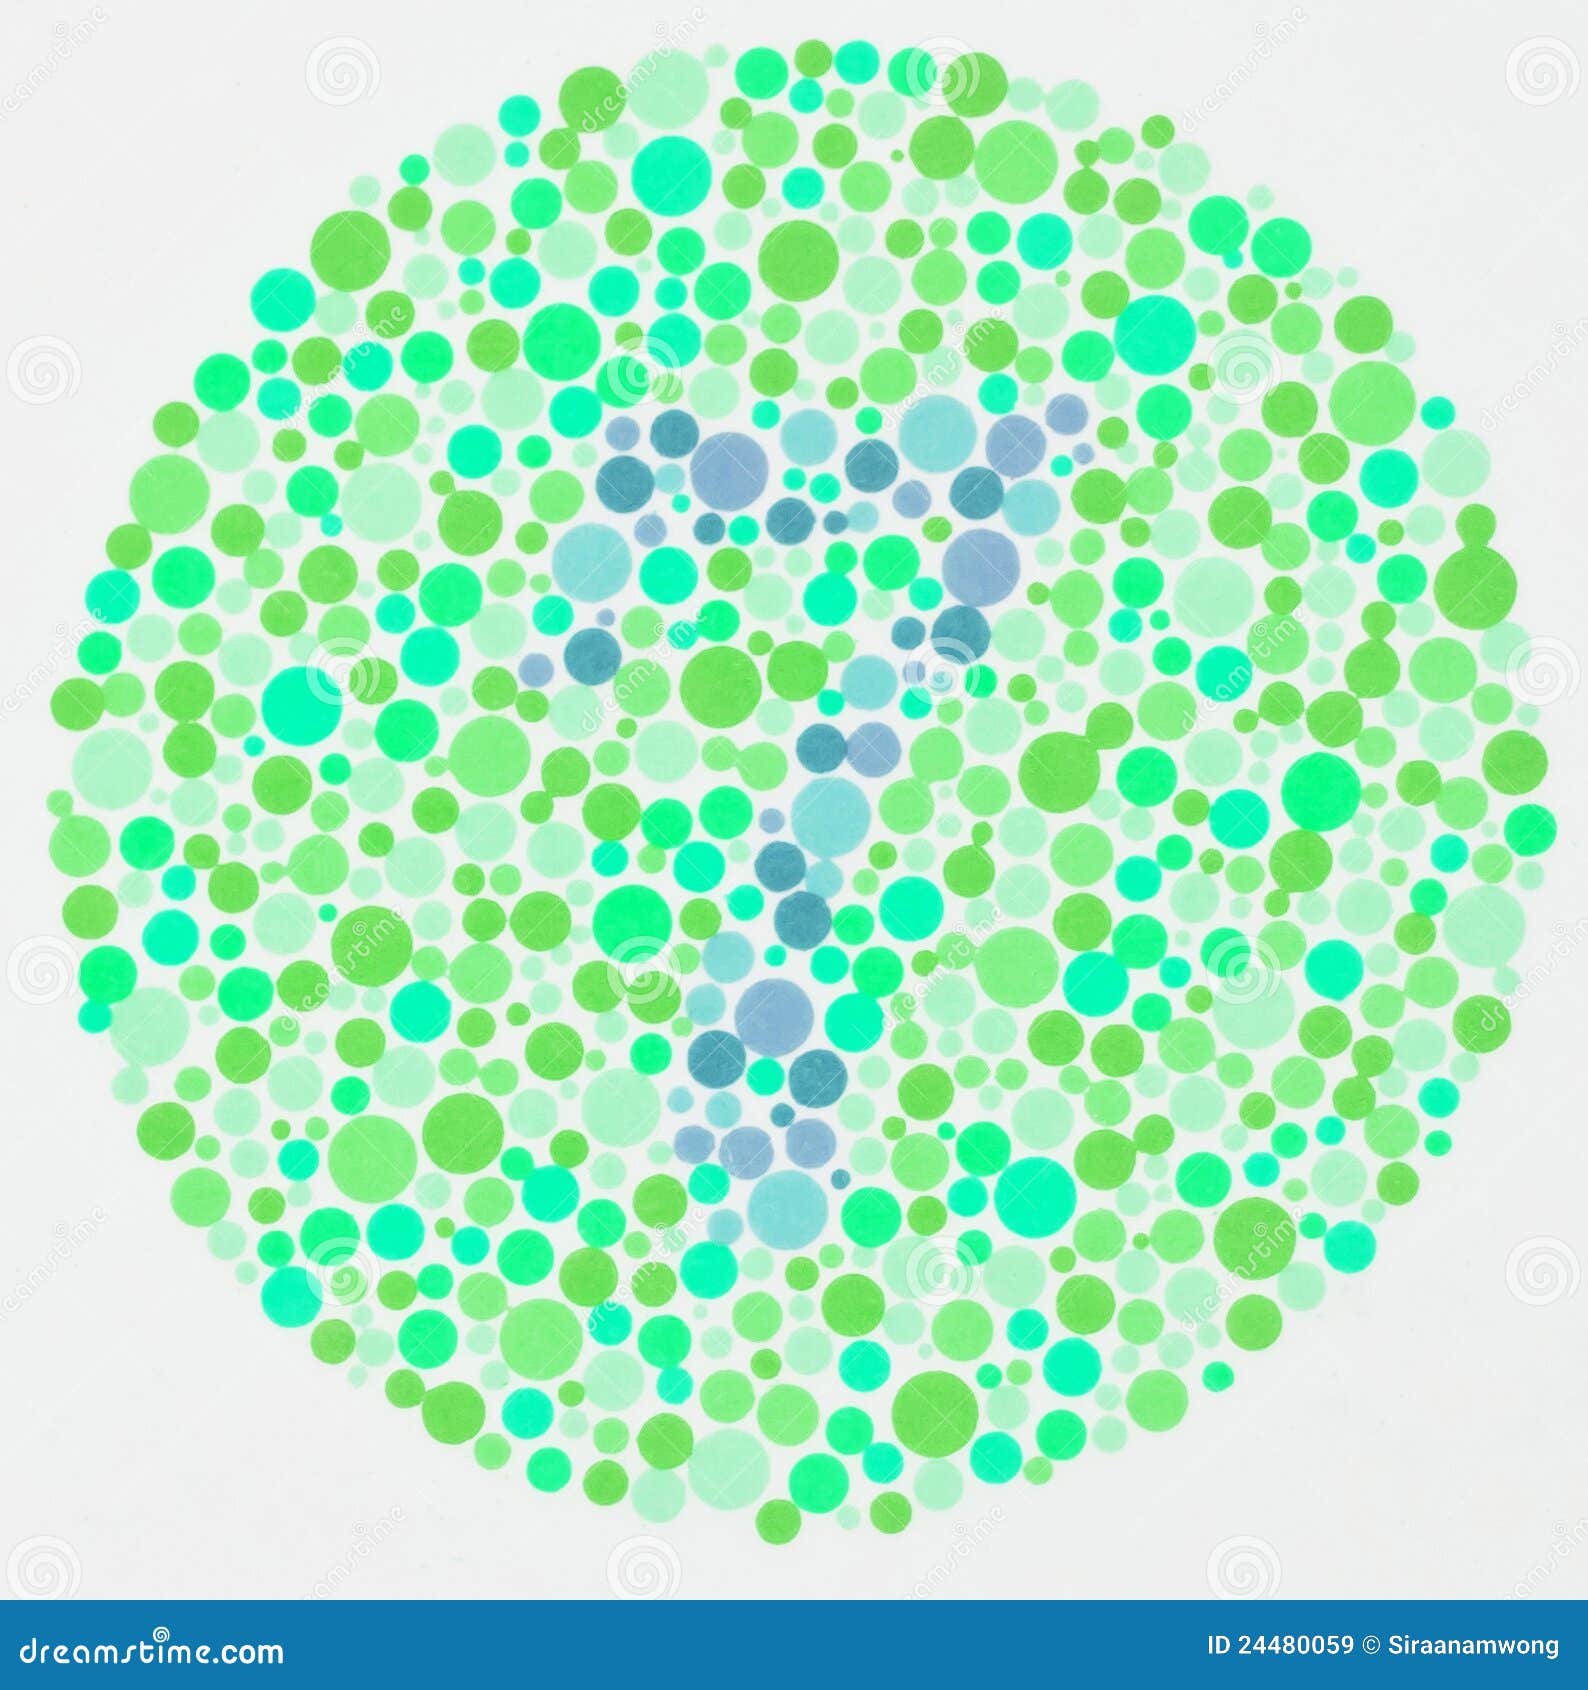 Color blind test - 7 stock image. Image of abstract, blue - 24480059